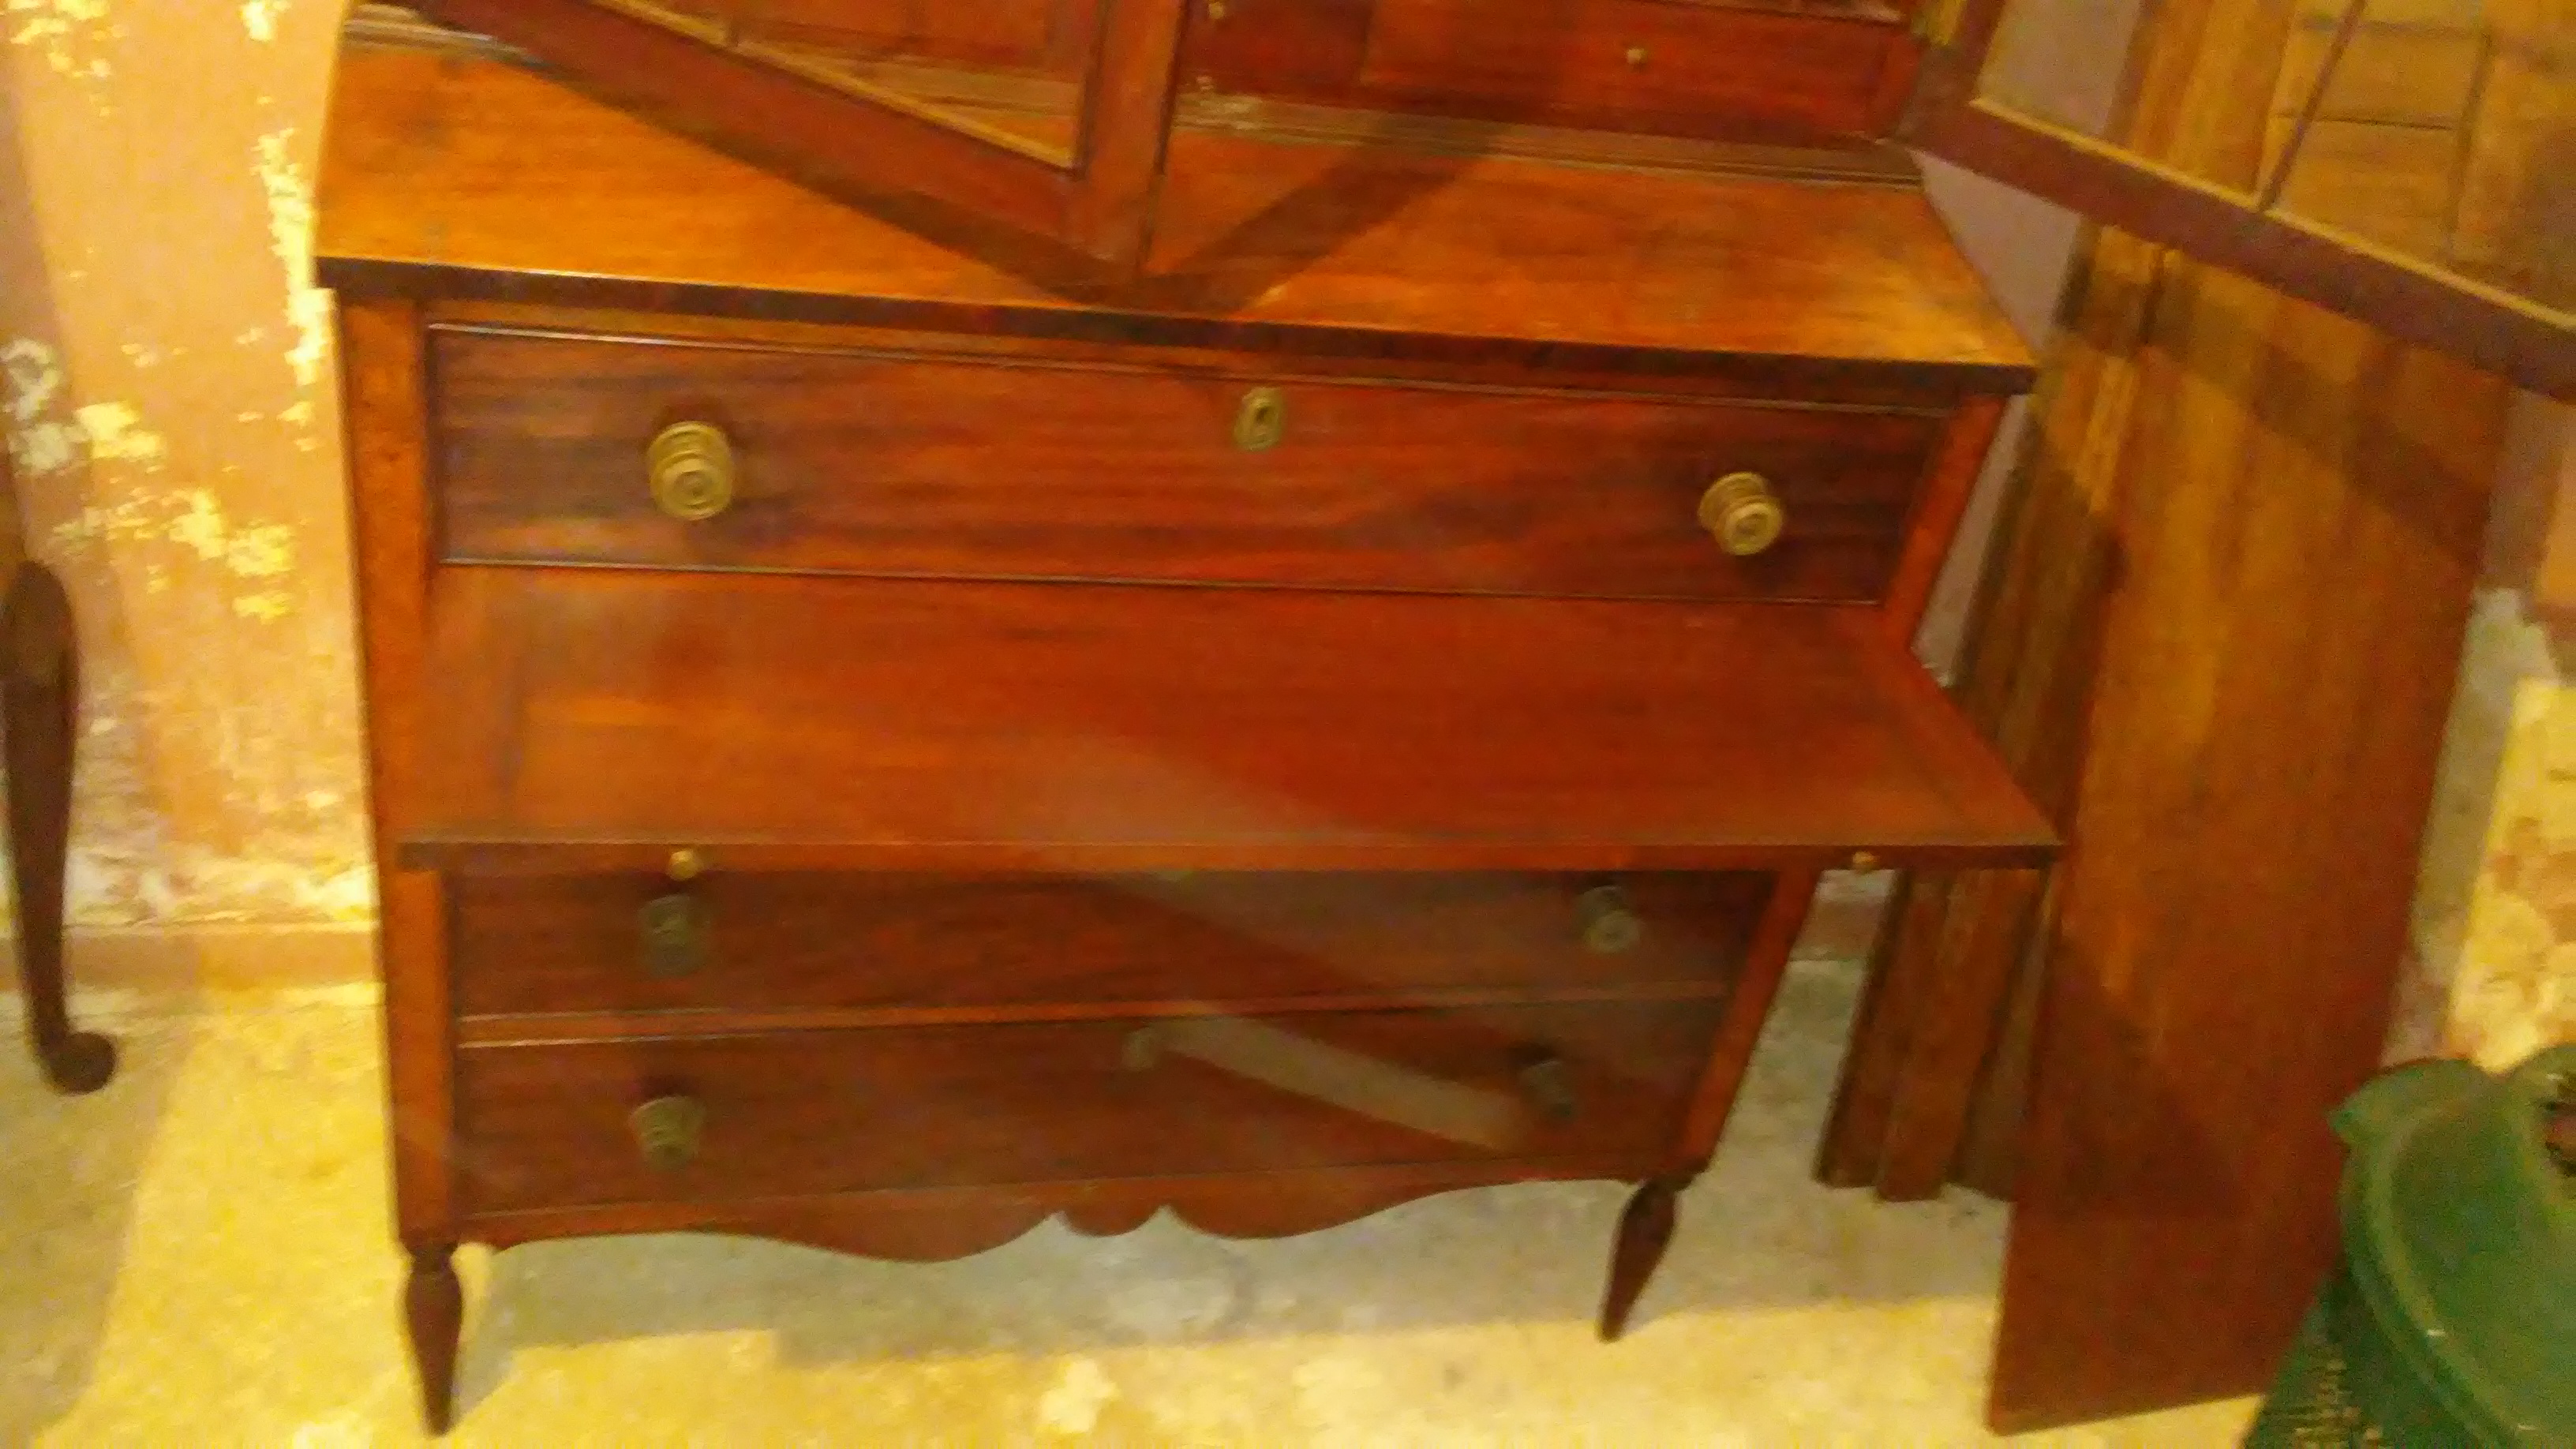 Federal Duncan Phyfe Secretary circa Early 1800s For Sale | Antiques ...